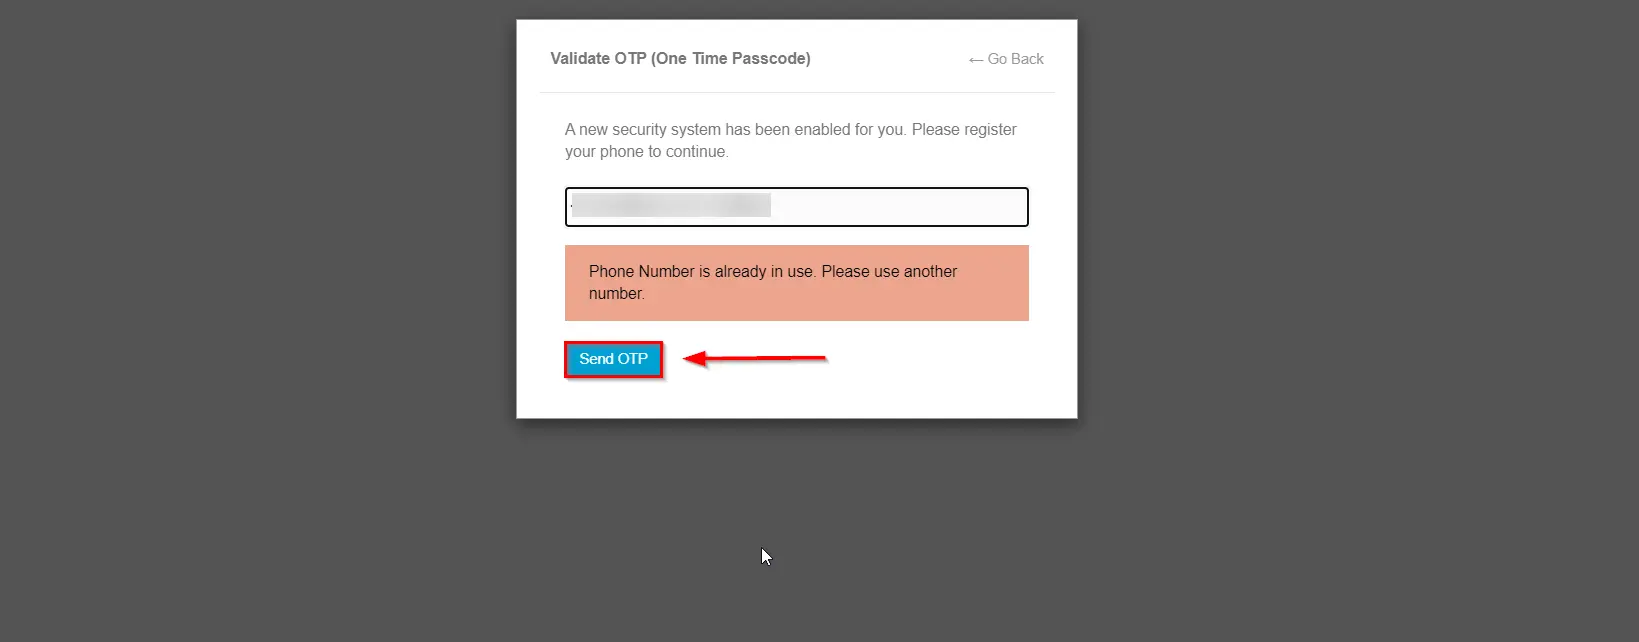 WordPress default login with OTP Verification - Don't allow users use same phone number